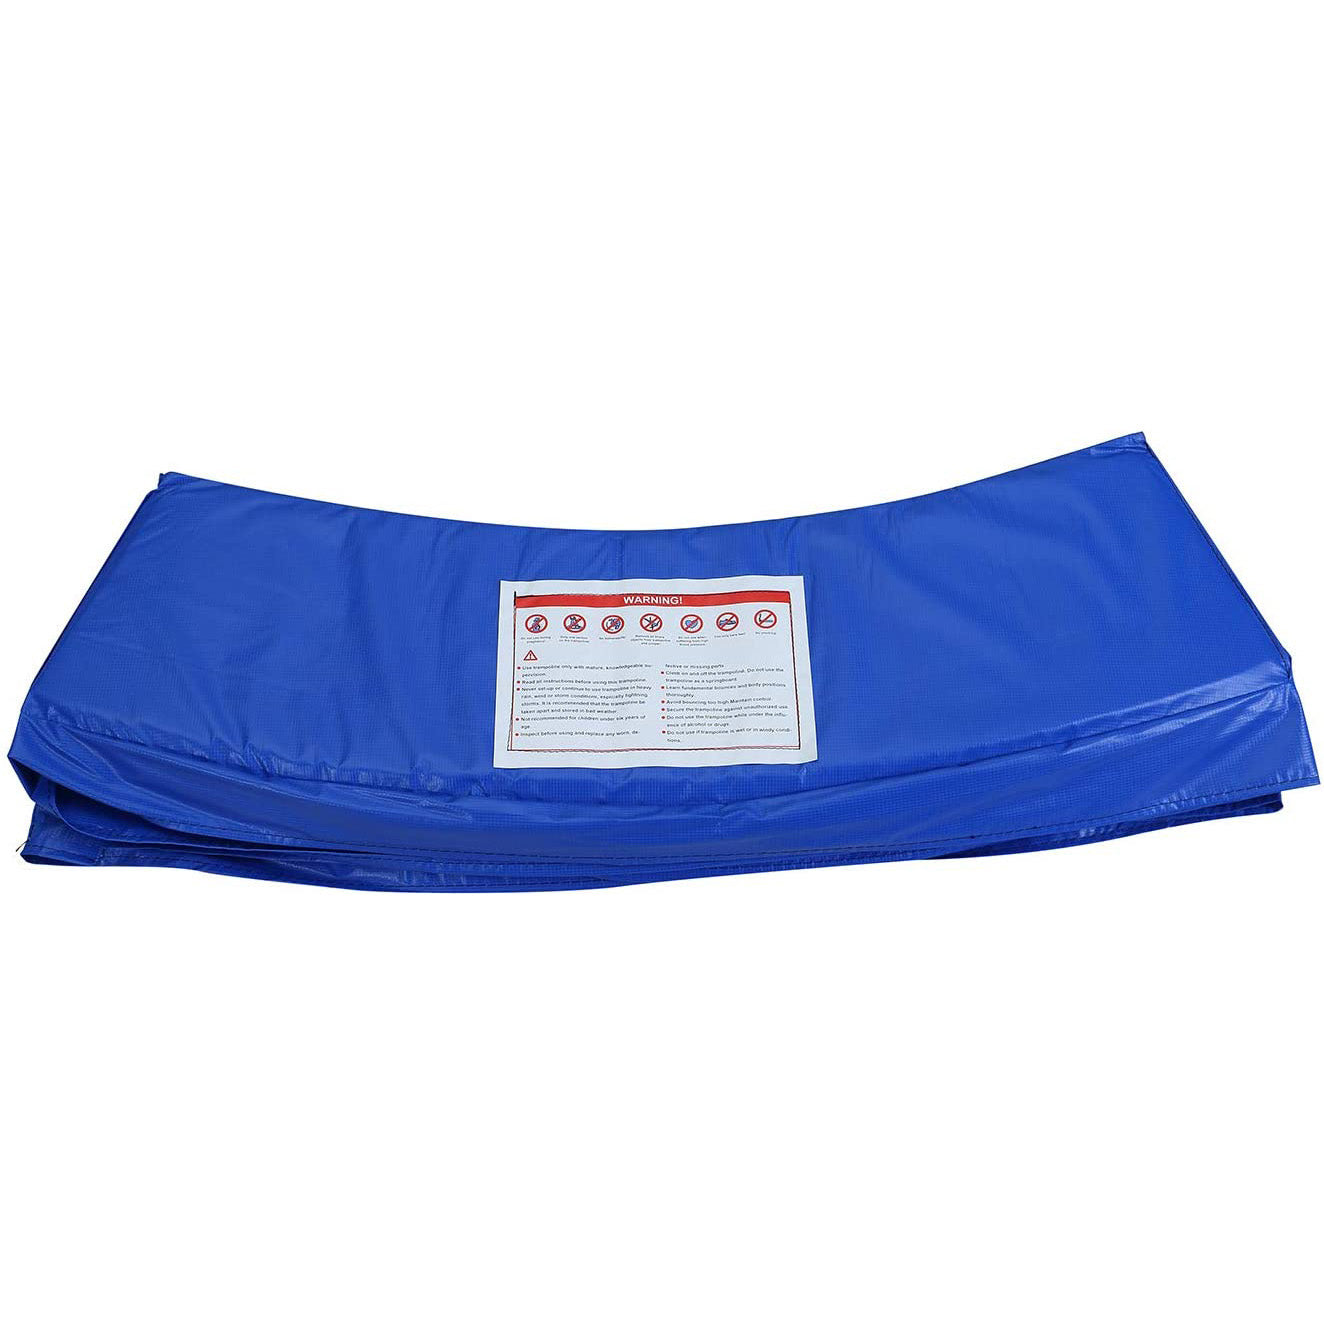 Trampoline Replacement Pad - Blue